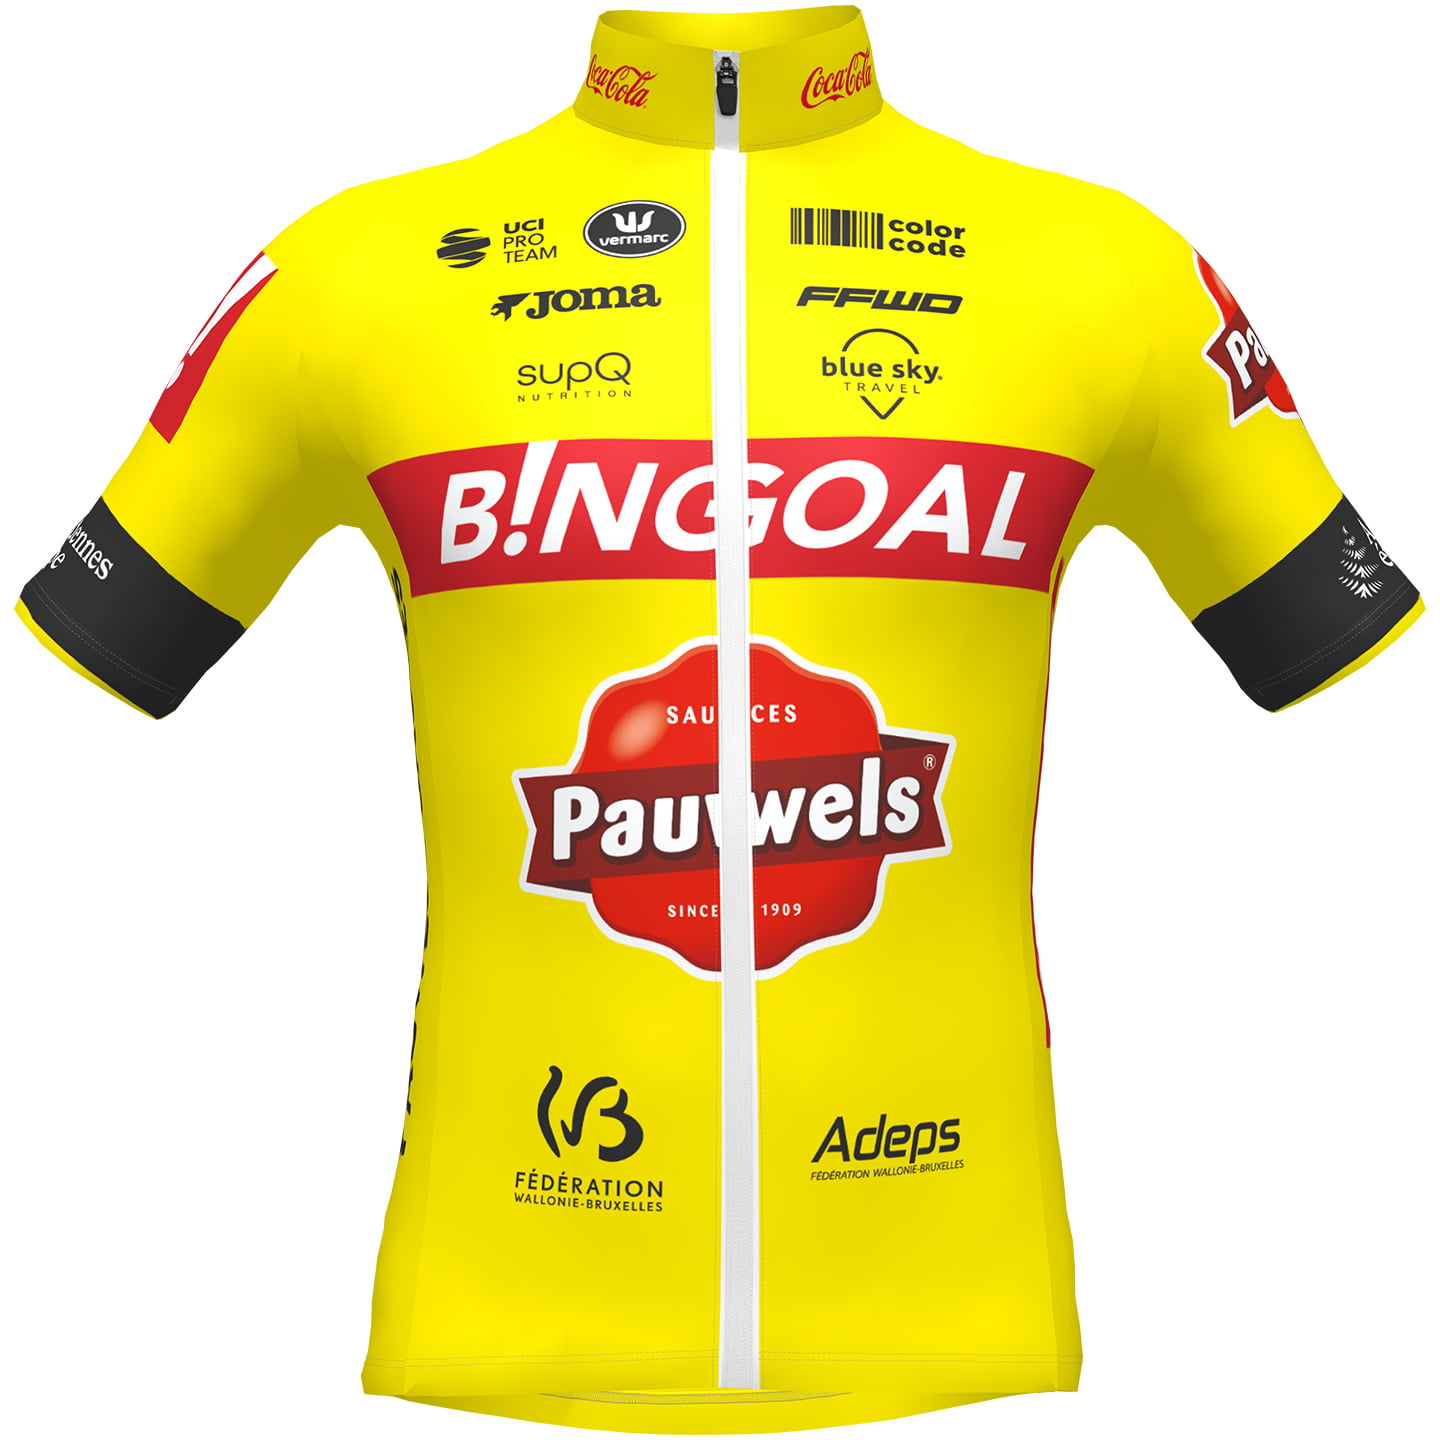 BINGOAL PAUWELS SAUCES WB 2022 Short Sleeve Jersey, for men, size M, Cycle jersey, Cycling clothing